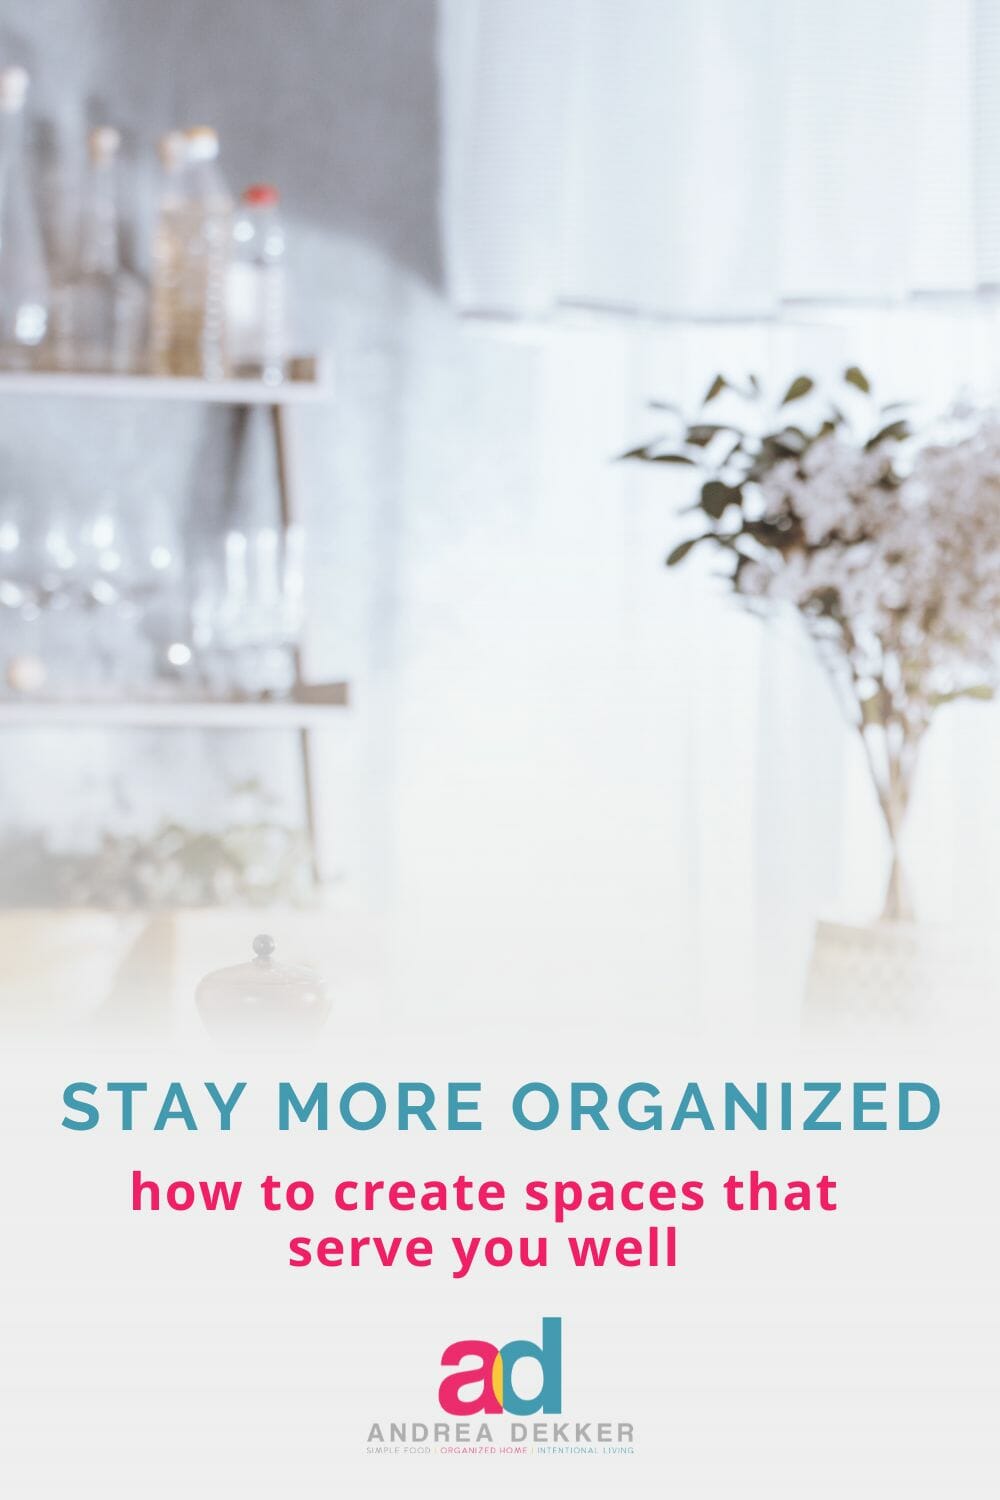 Do you feel like your spaces serve you and your family at this stage of life? If not, let me help you create spaces that do! via @andreadekker